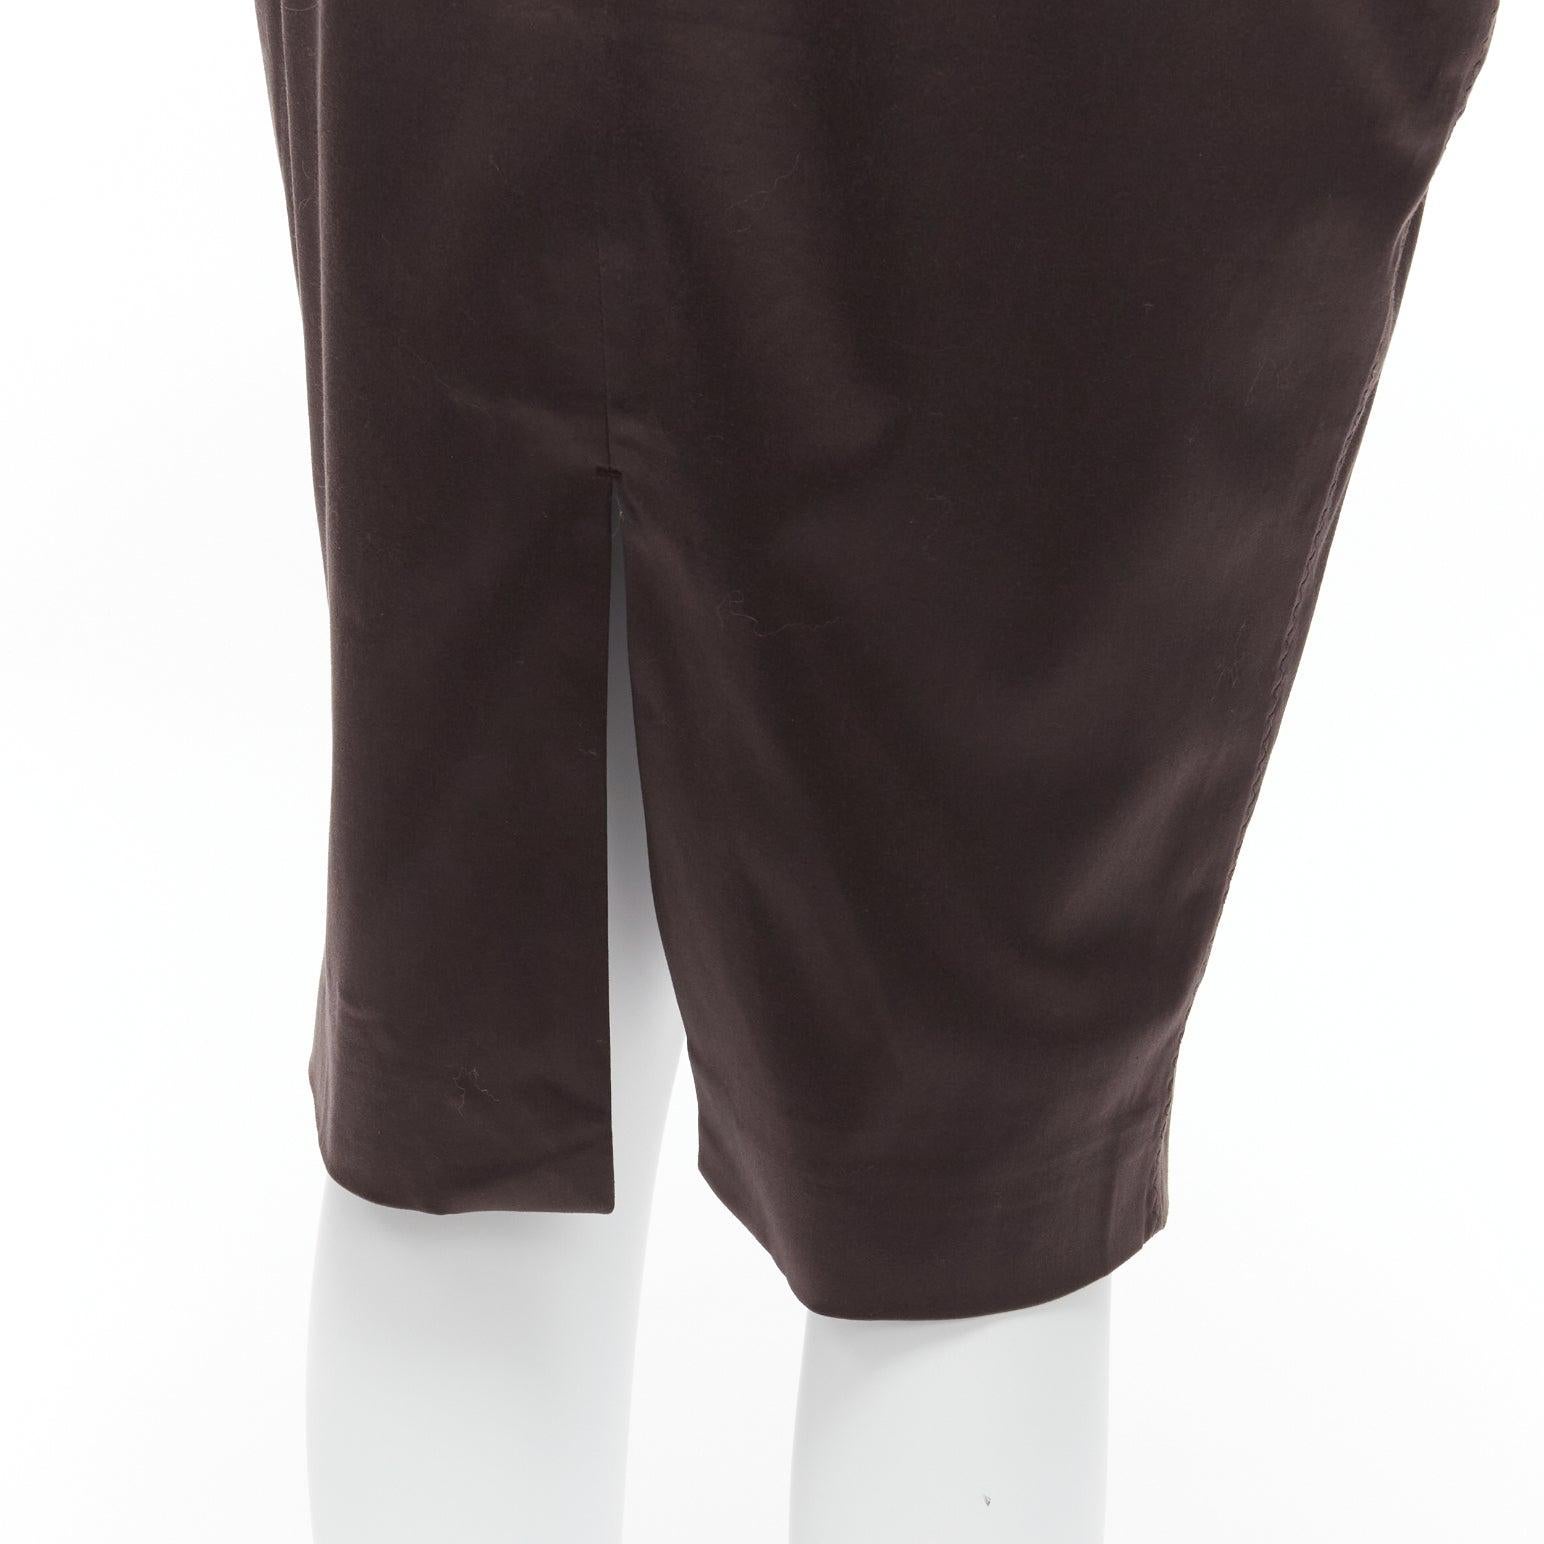 GUCCI brown silky texture zigzag topstitch flap waistband pencil knee skirt IT42 M
Reference: GIYG/A00351
Brand: Gucci
Material: Feels like cotton
Color: Brown
Pattern: Solid
Closure: Elasticated
Lining: Brown Fabric
Extra Details: Zigzag stitch